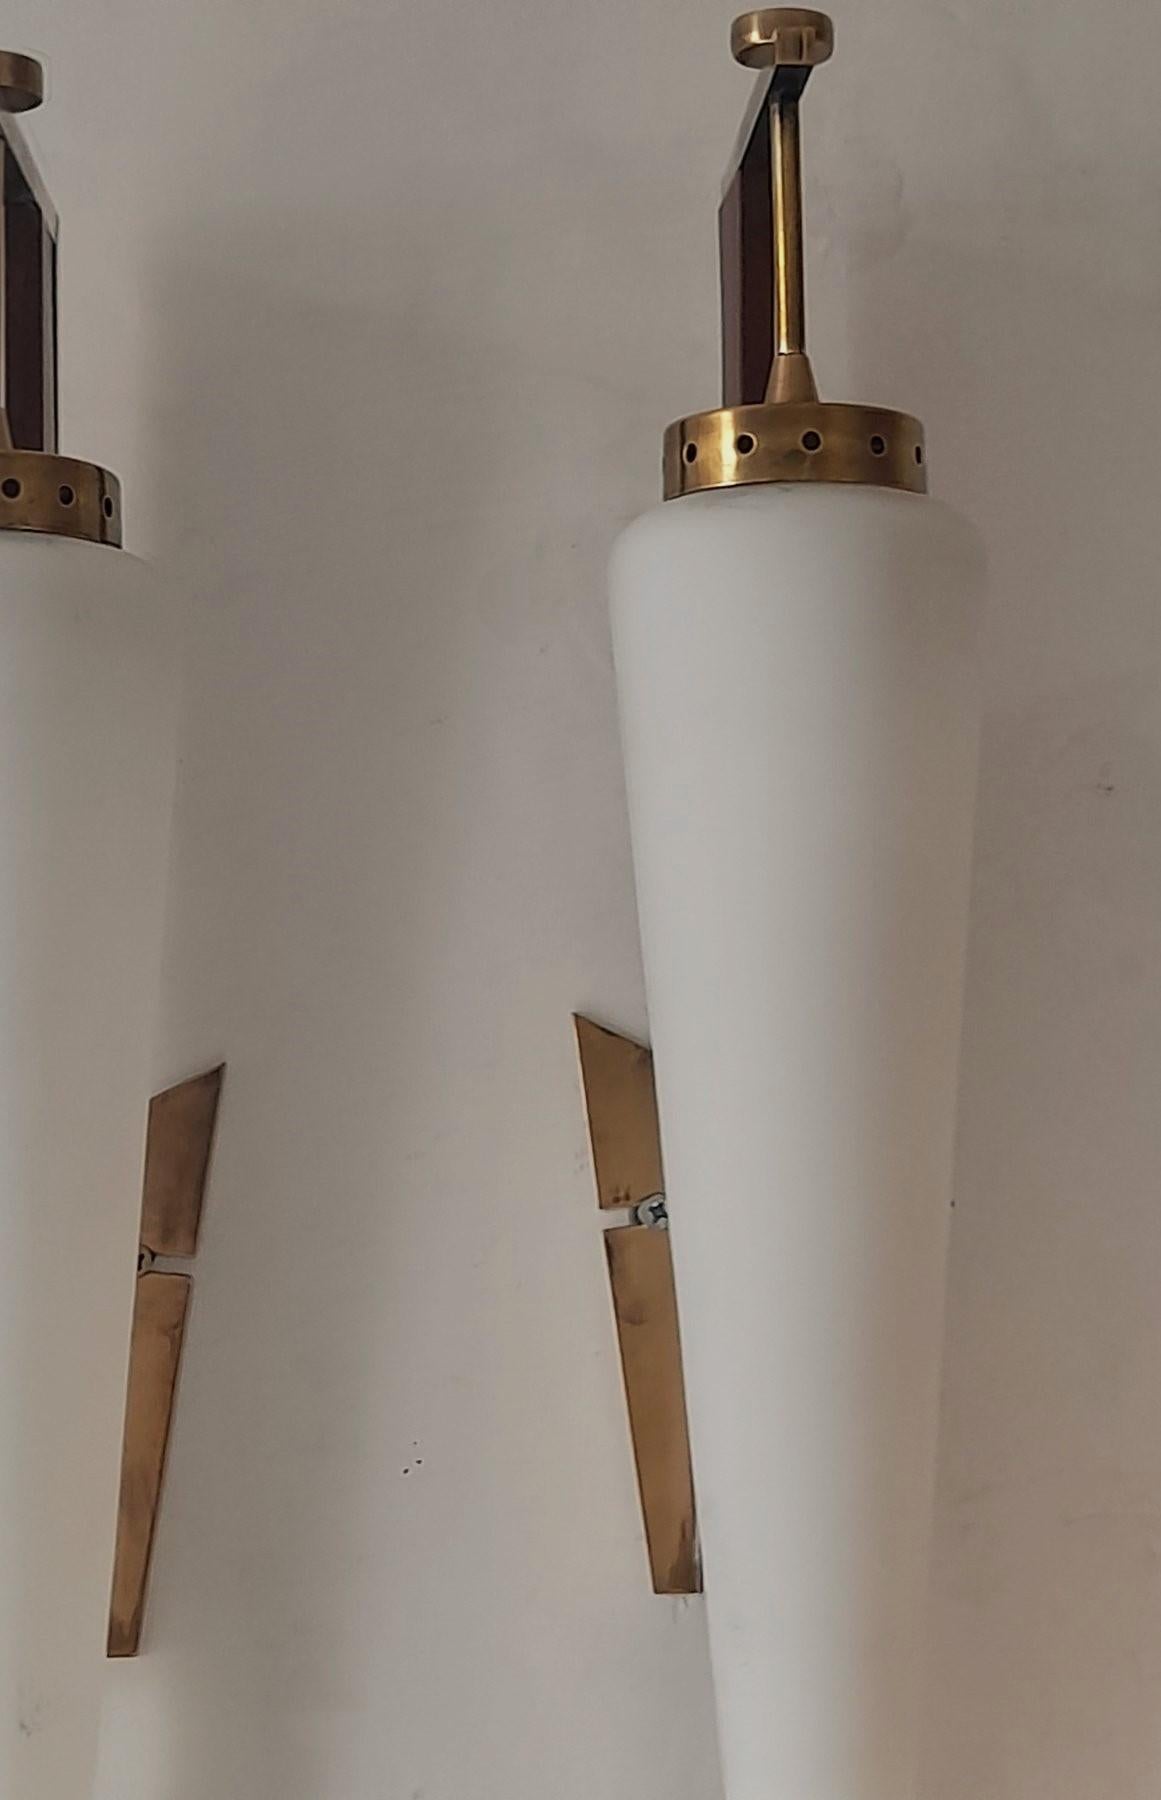 Three Stilnovo Sconces Wall Lights Brass Satin Glass Wood Accents, Italy, 1950s For Sale 3